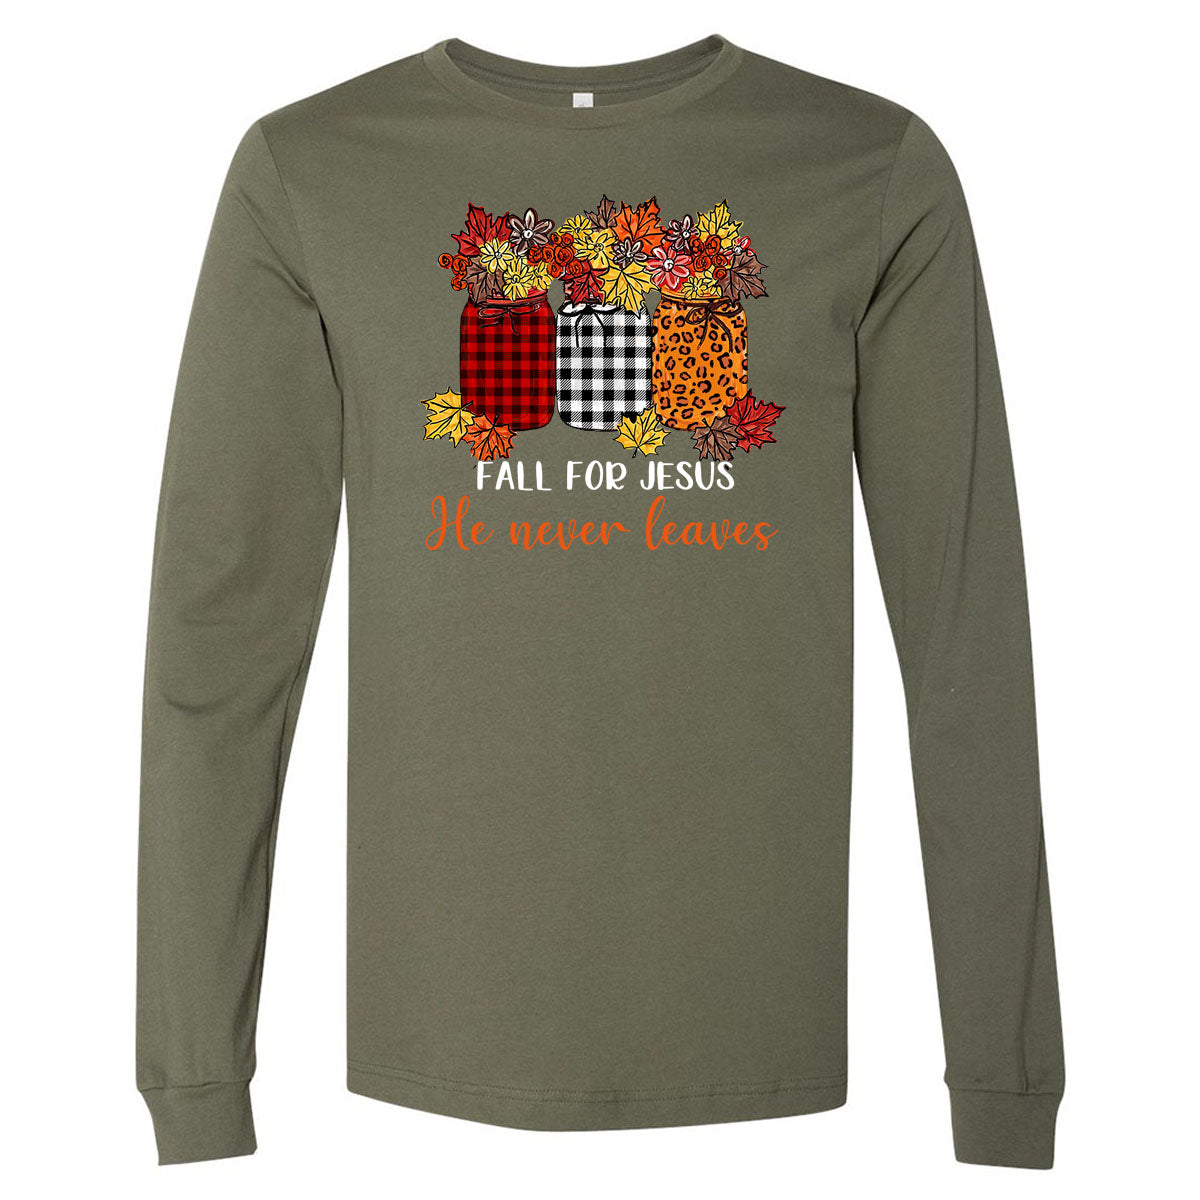 Fall For Jesus He Never Leaves - Green Tee - Southern Grace Creations